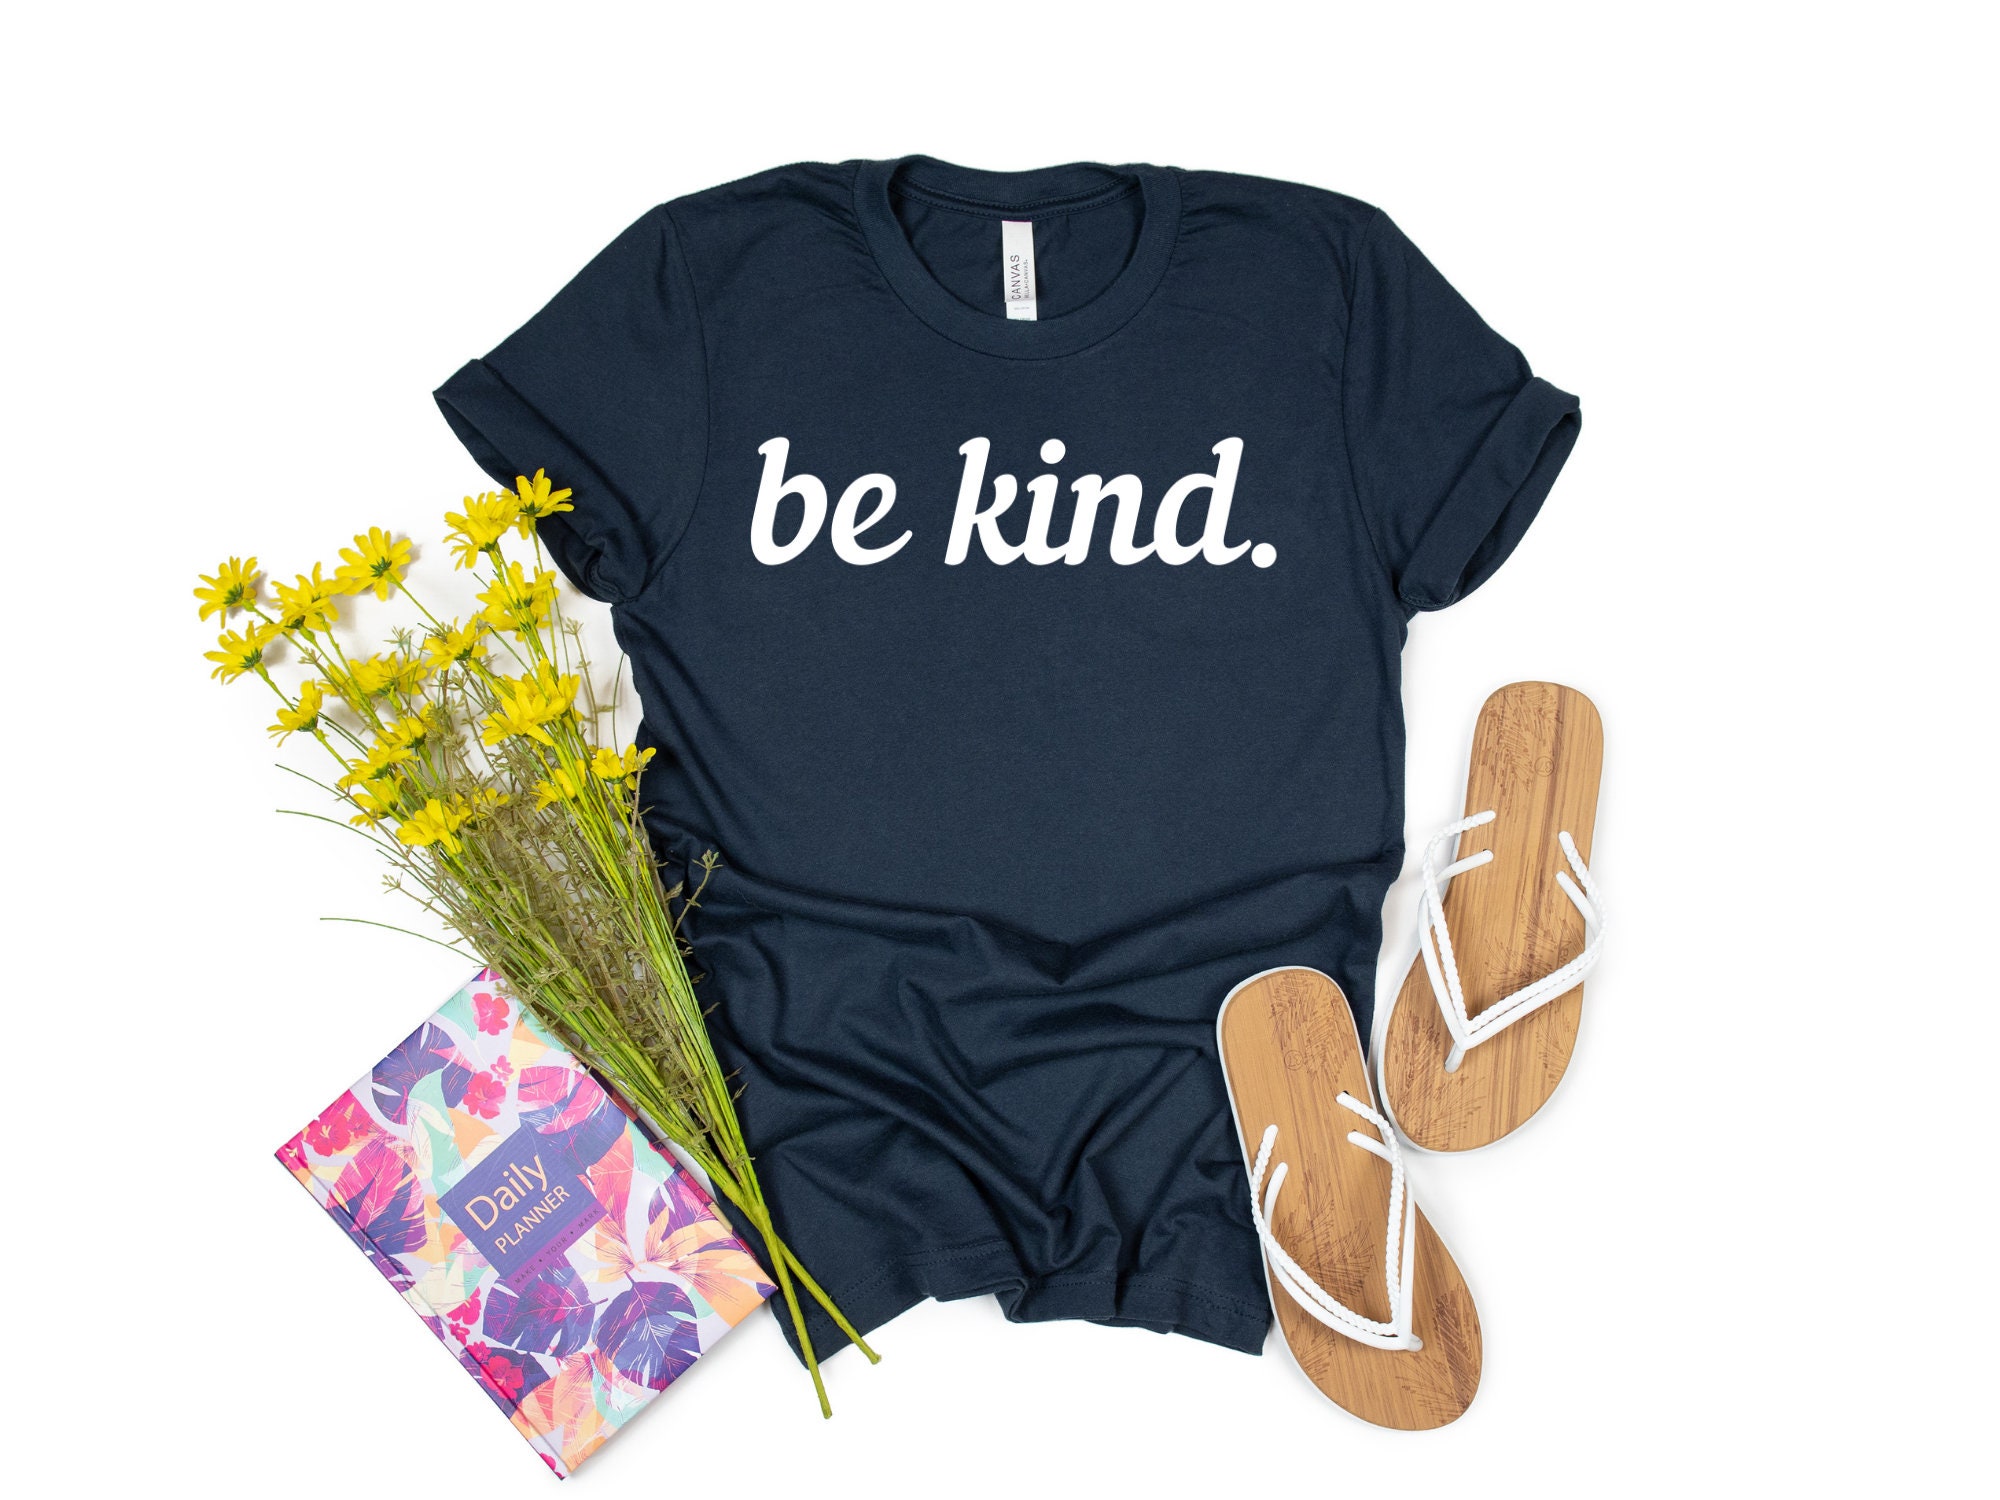 Kindness Shirt Positivity Quote Kind Shirt Be Kind Tshirt Always Be Kind Shirt Kindeness Tee Inspirational Shirt Positive Gift